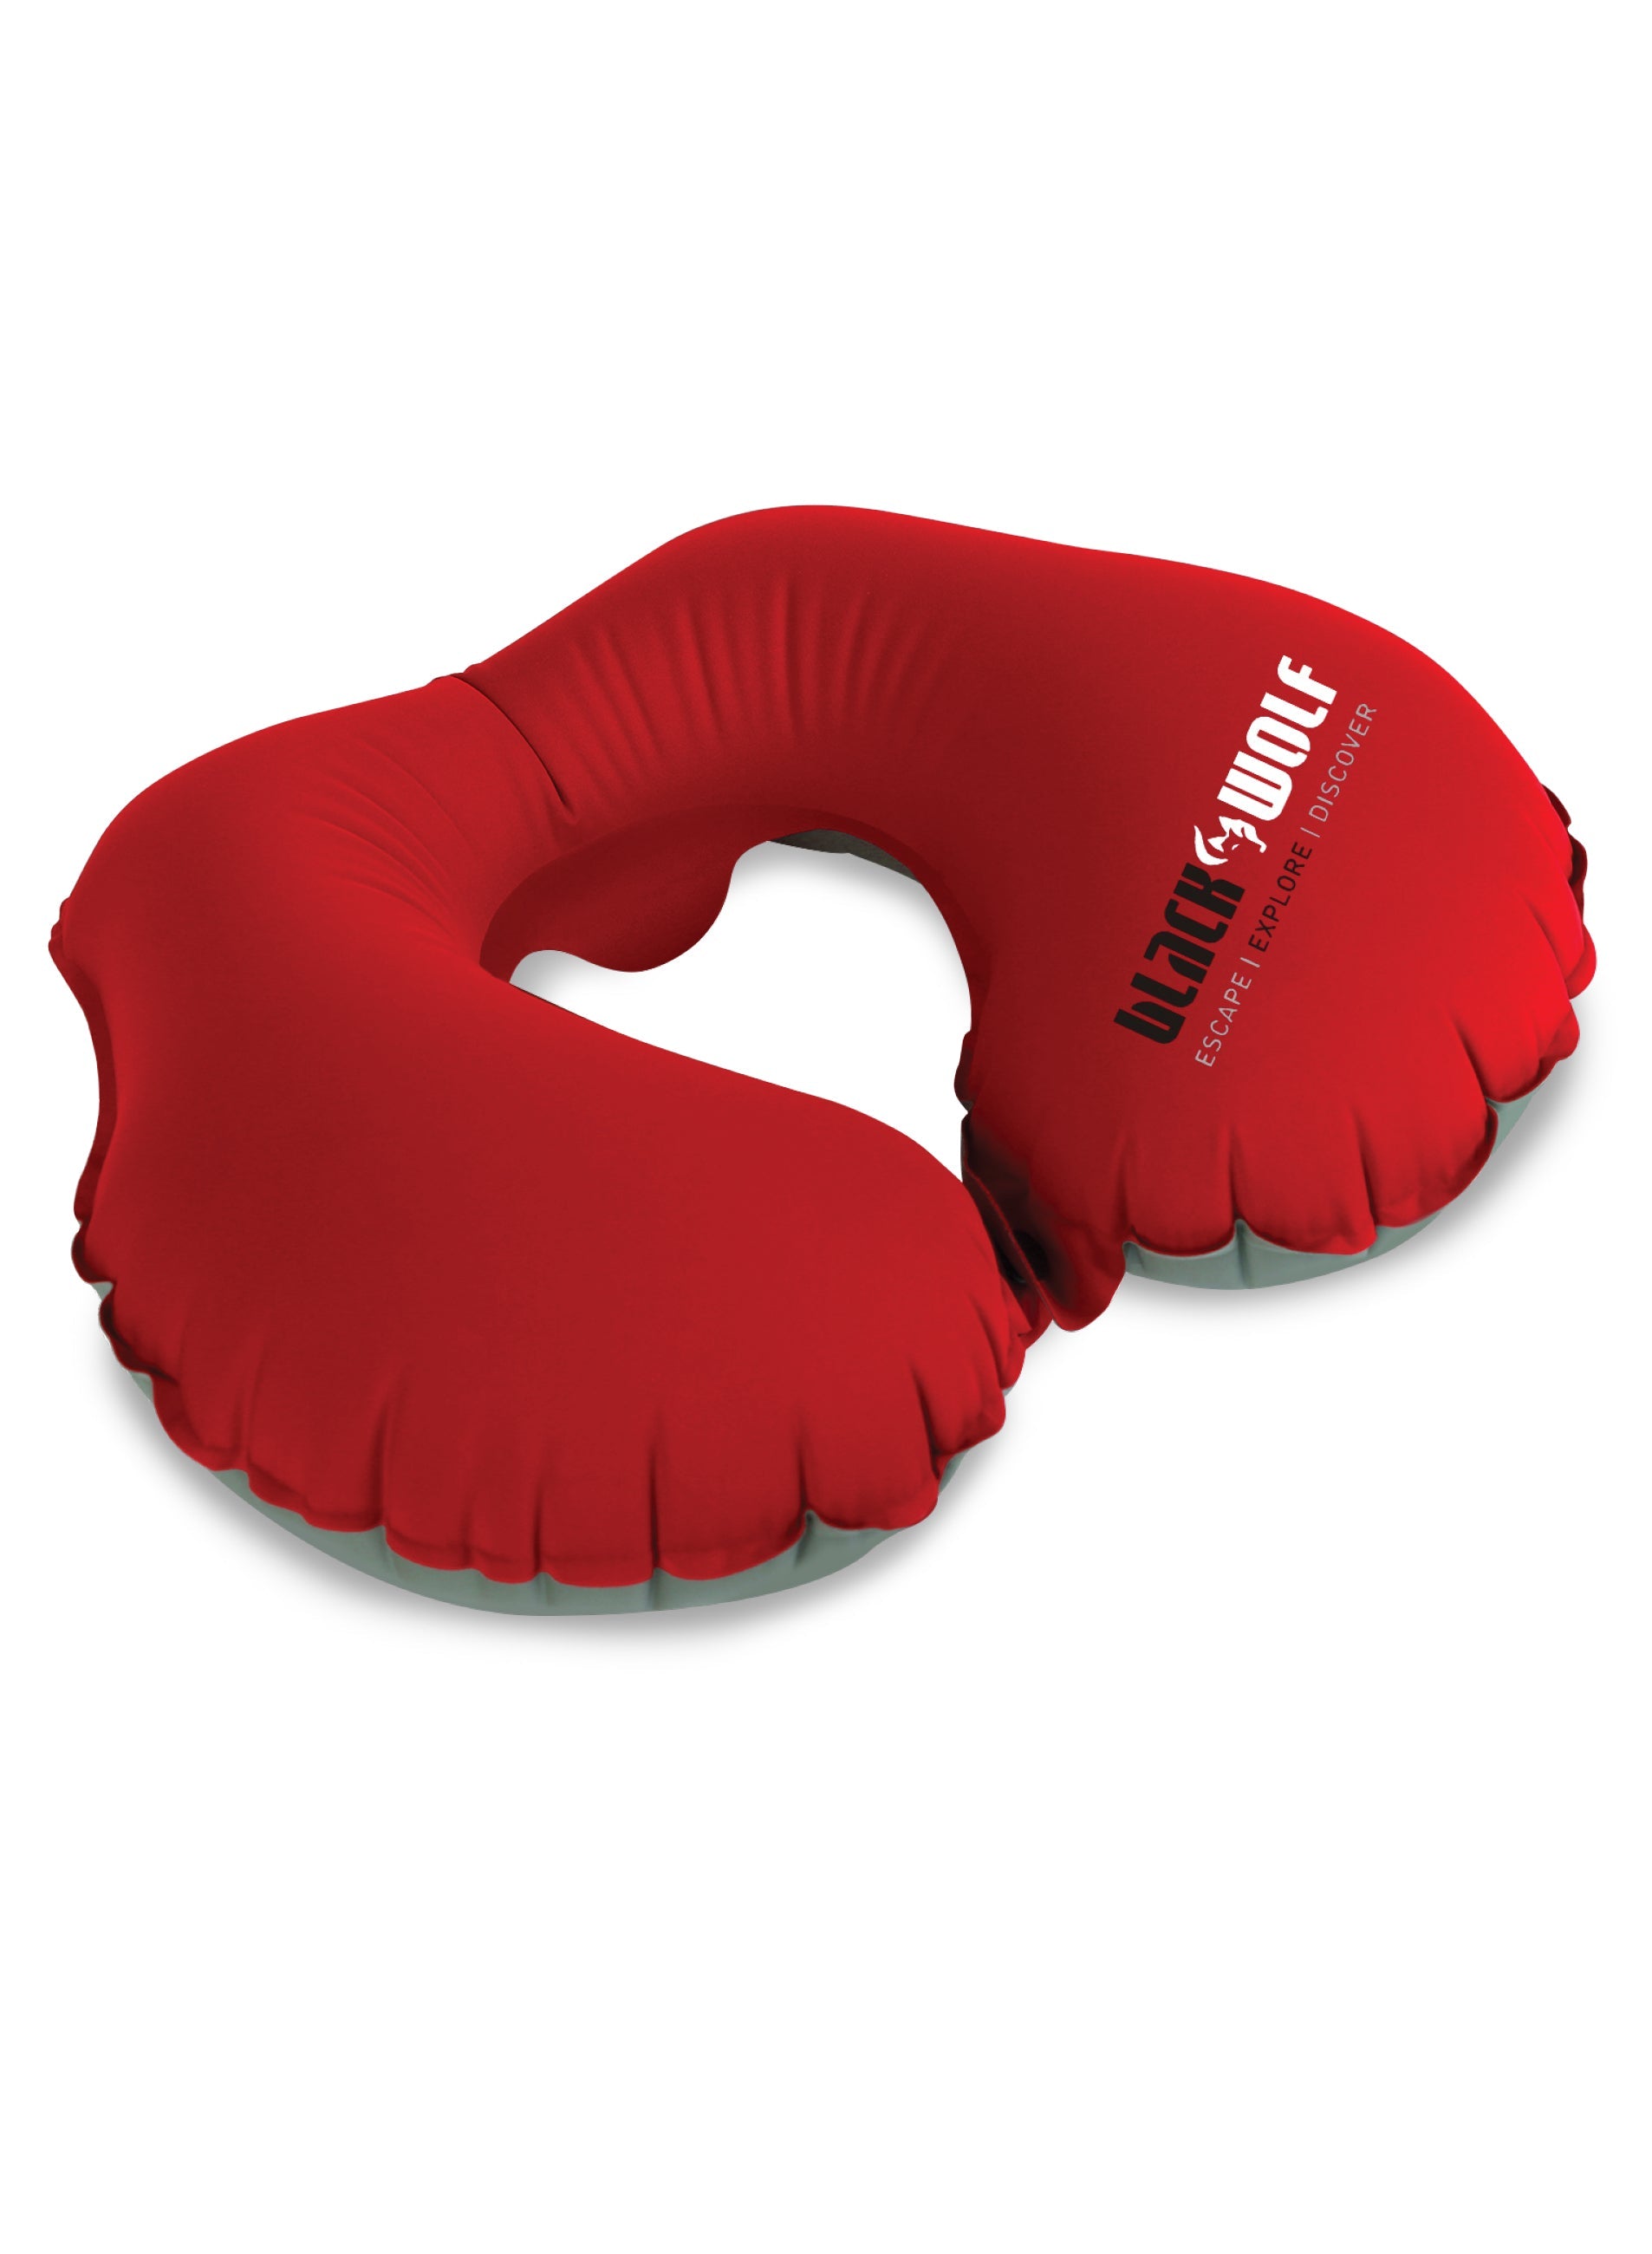 Black Wolf - Air-Lite Travel inflatable neck pillow - RED